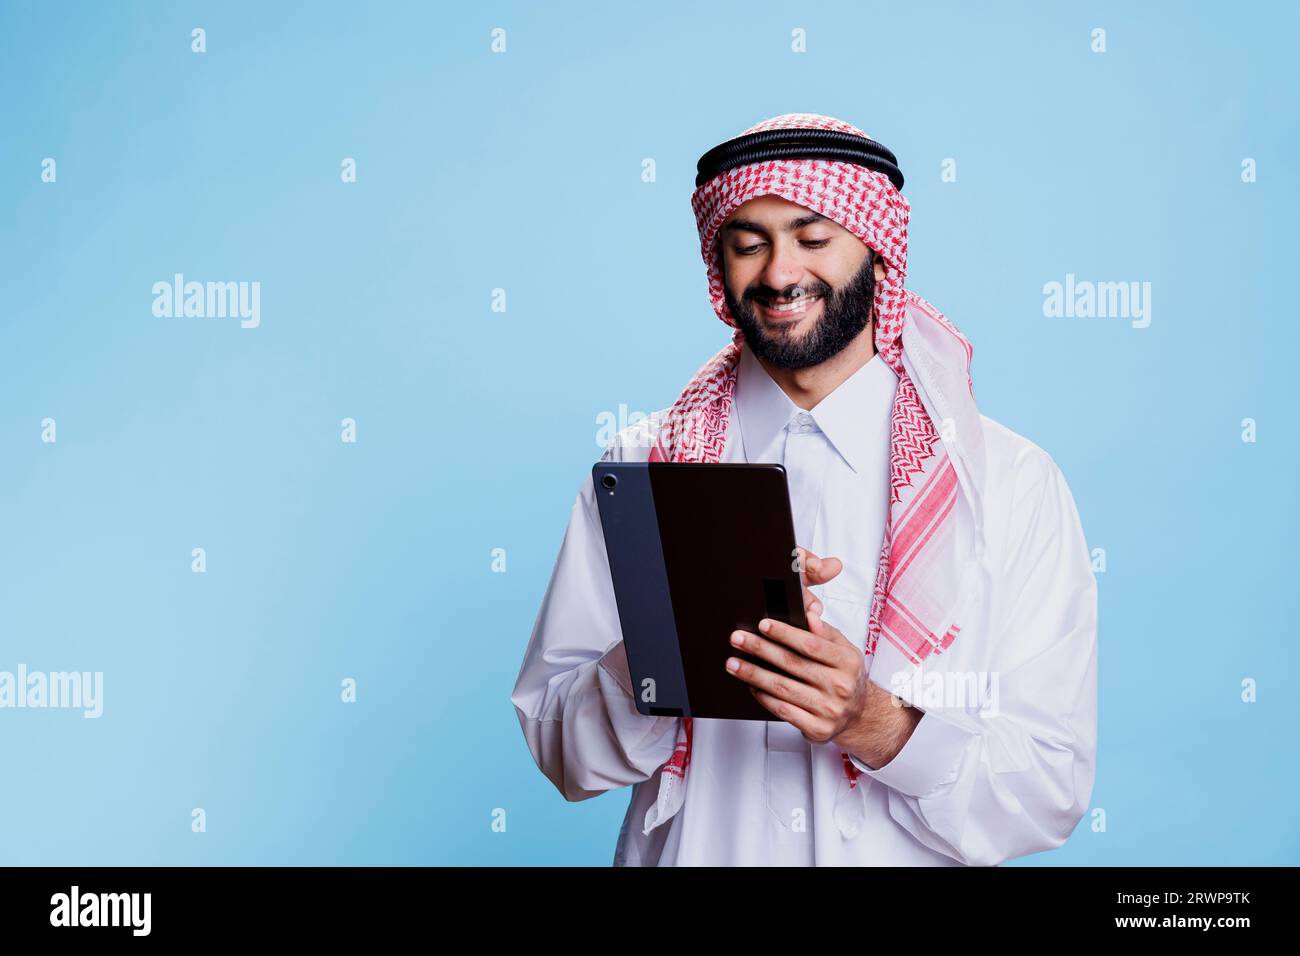 Smiling man wearing muslim headdress and thobe holding digital tablet and tapping on touchscreen. Arab person scrolling internet page on portable gadget with cheerful expression Stock Photo